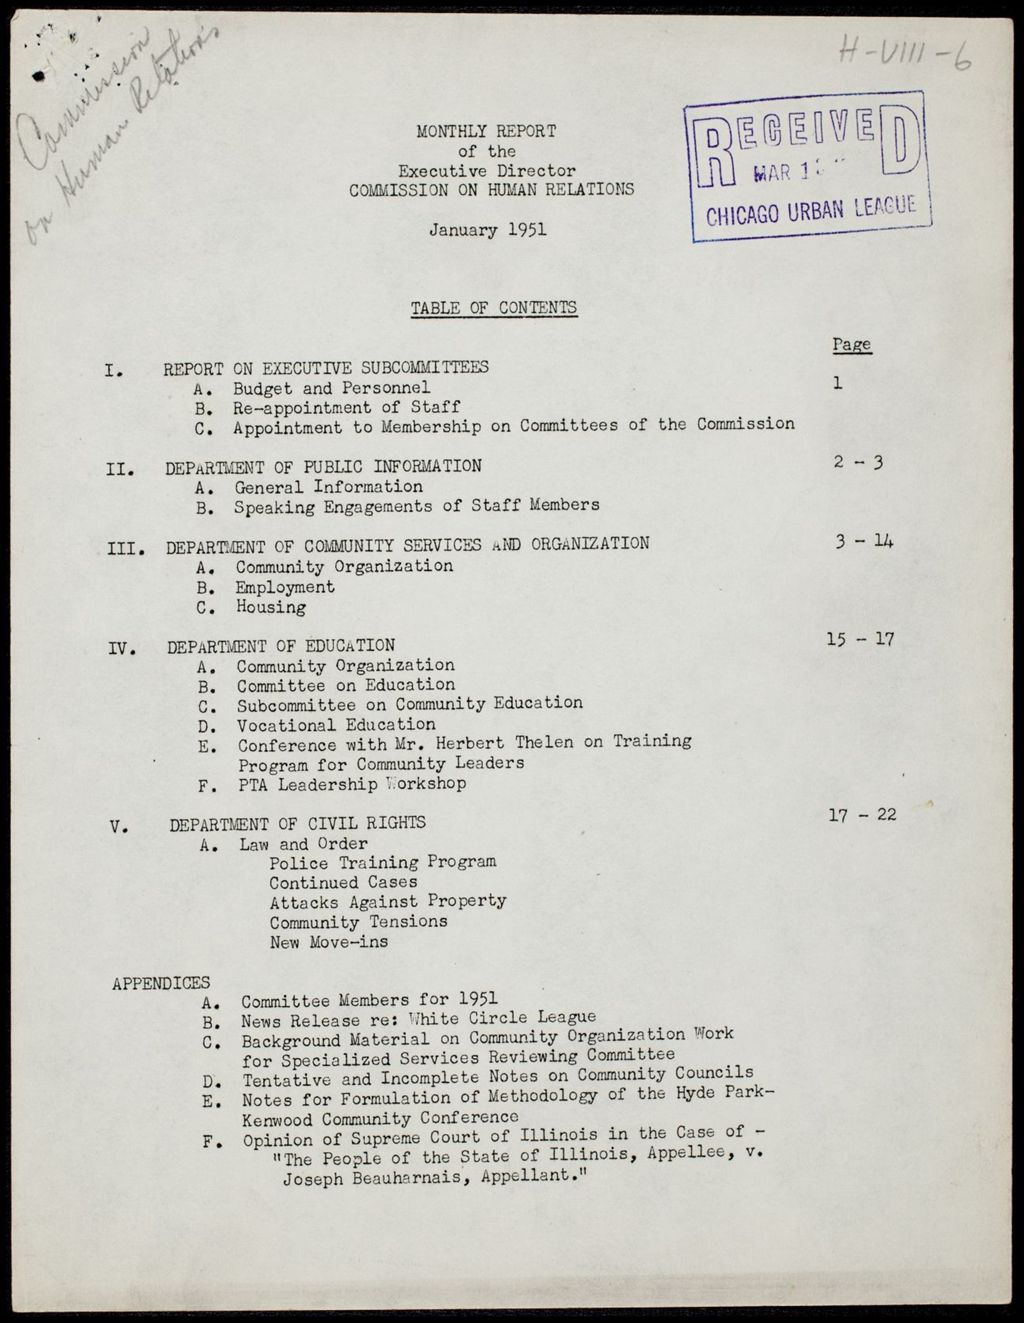 Miniature of Chicago Commission on Human Relations Executive Director reports, 1951 (Folder I-2792)